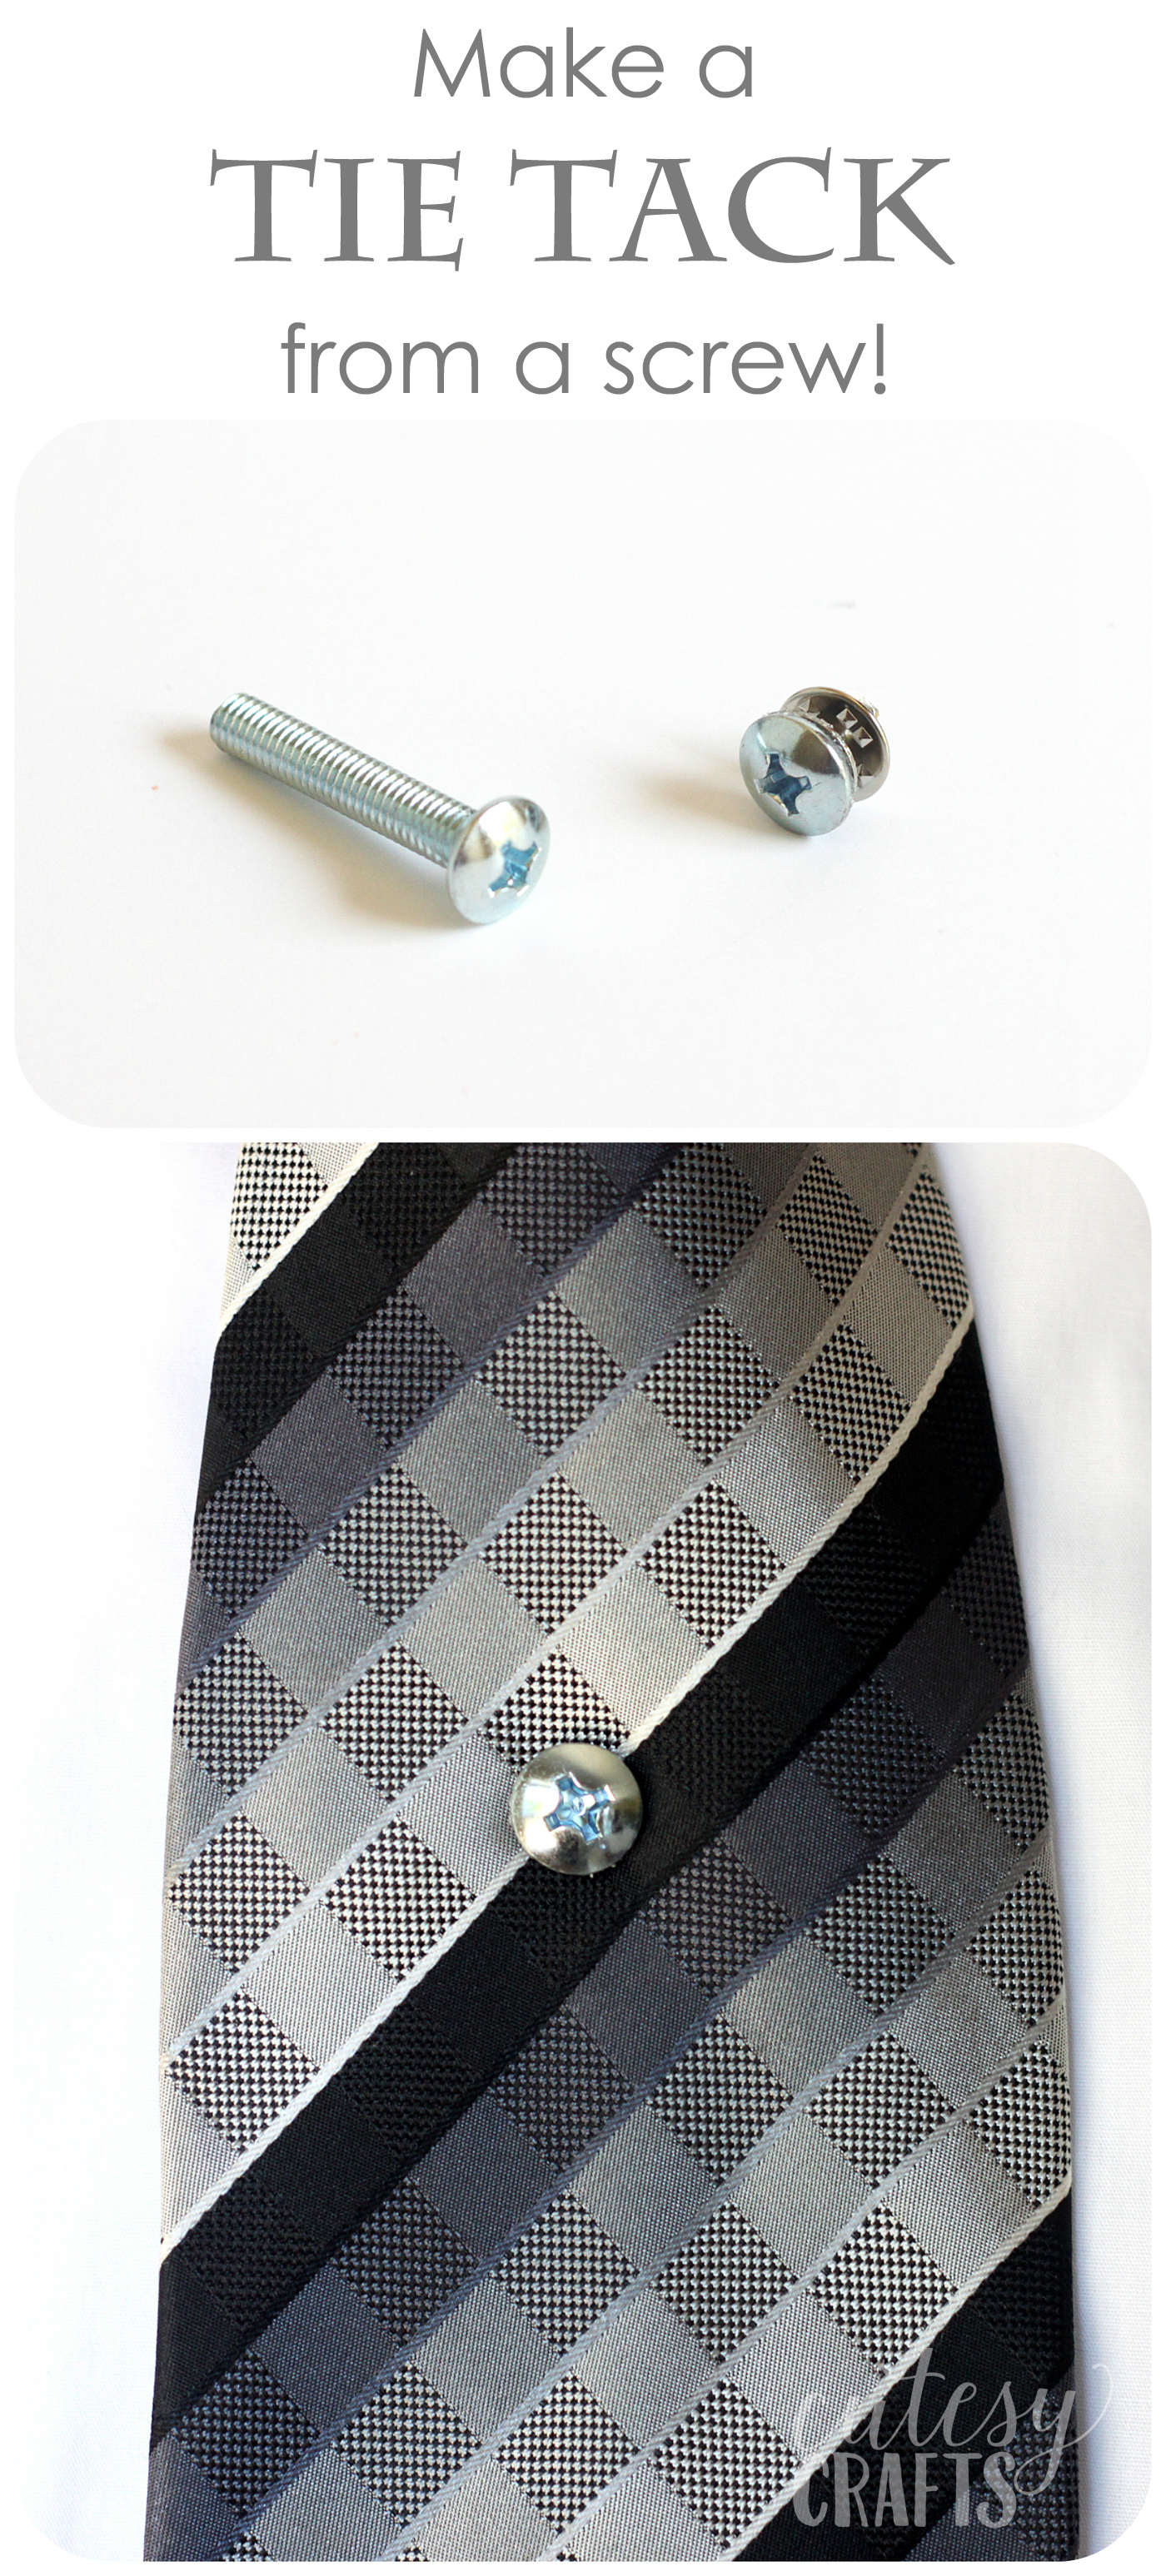 Turn a screw into the coolest tie tack ever - it's easy! Great for any guy that wants to make a statement. This is the perfect gift for Father's Day. 